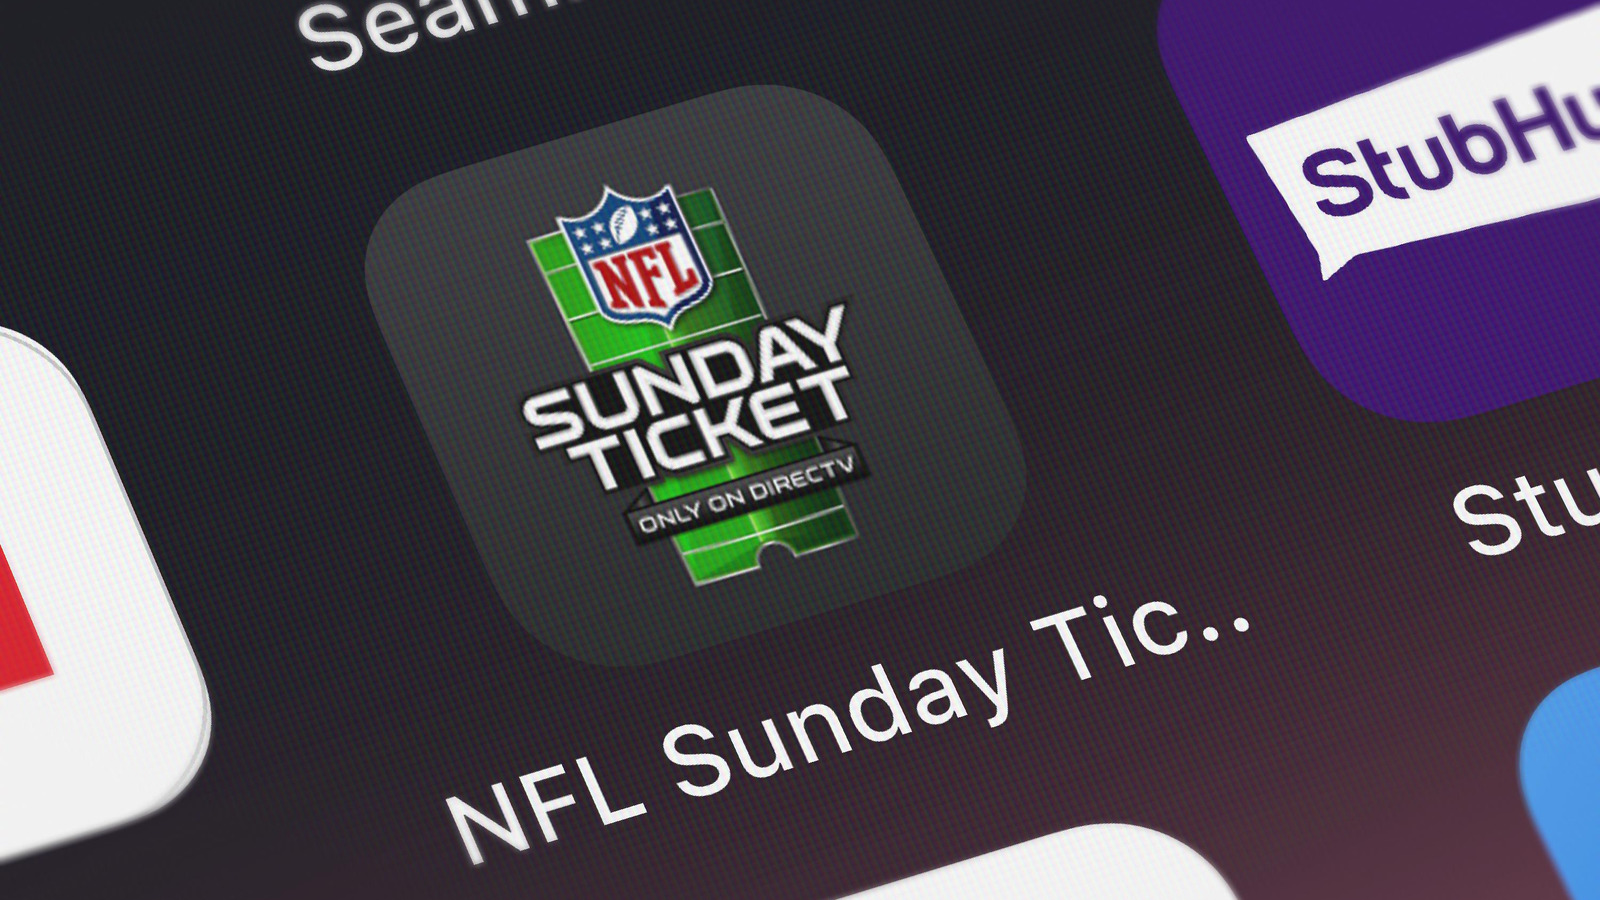 Google confirms pricing plans for NFL Sunday Ticket on   TV